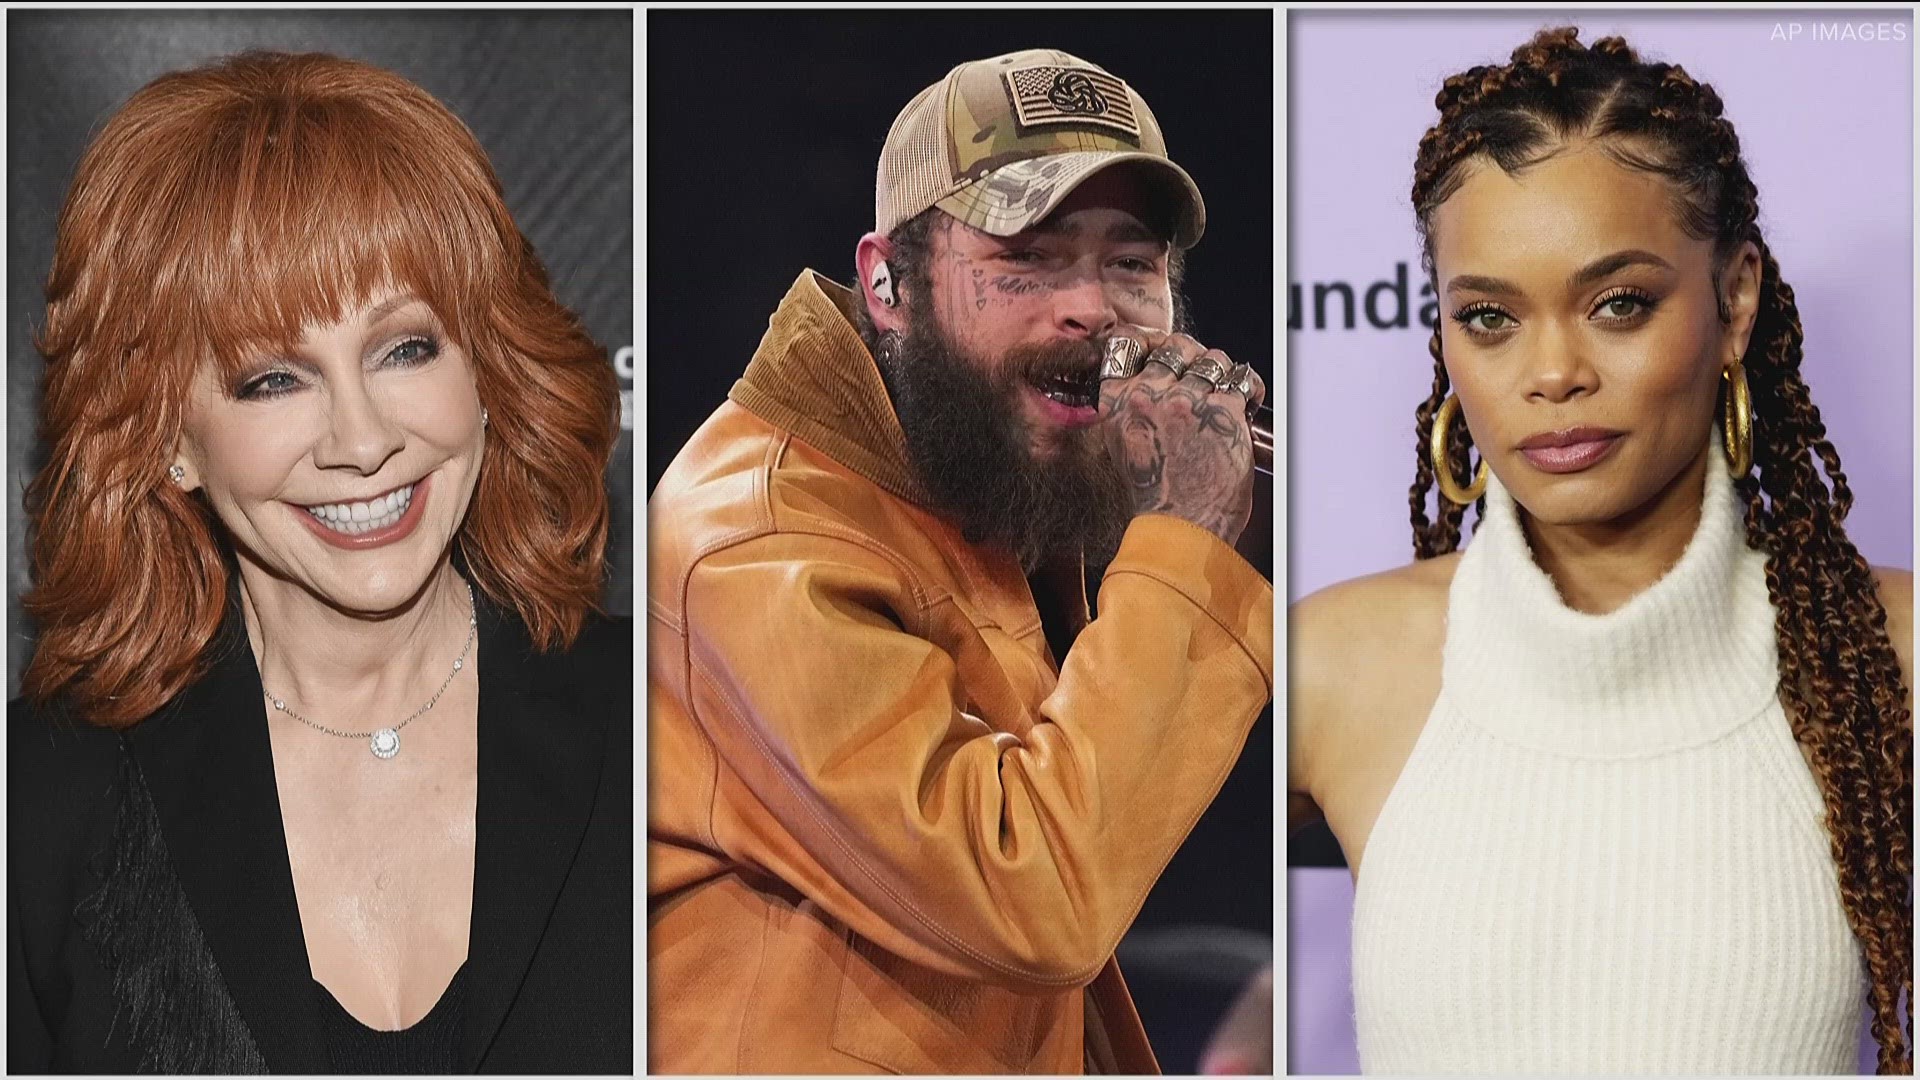 Reba McEntire, Post Malone and Andra Day are all performing Sunday along with Usher. Here's how much they will get paid.